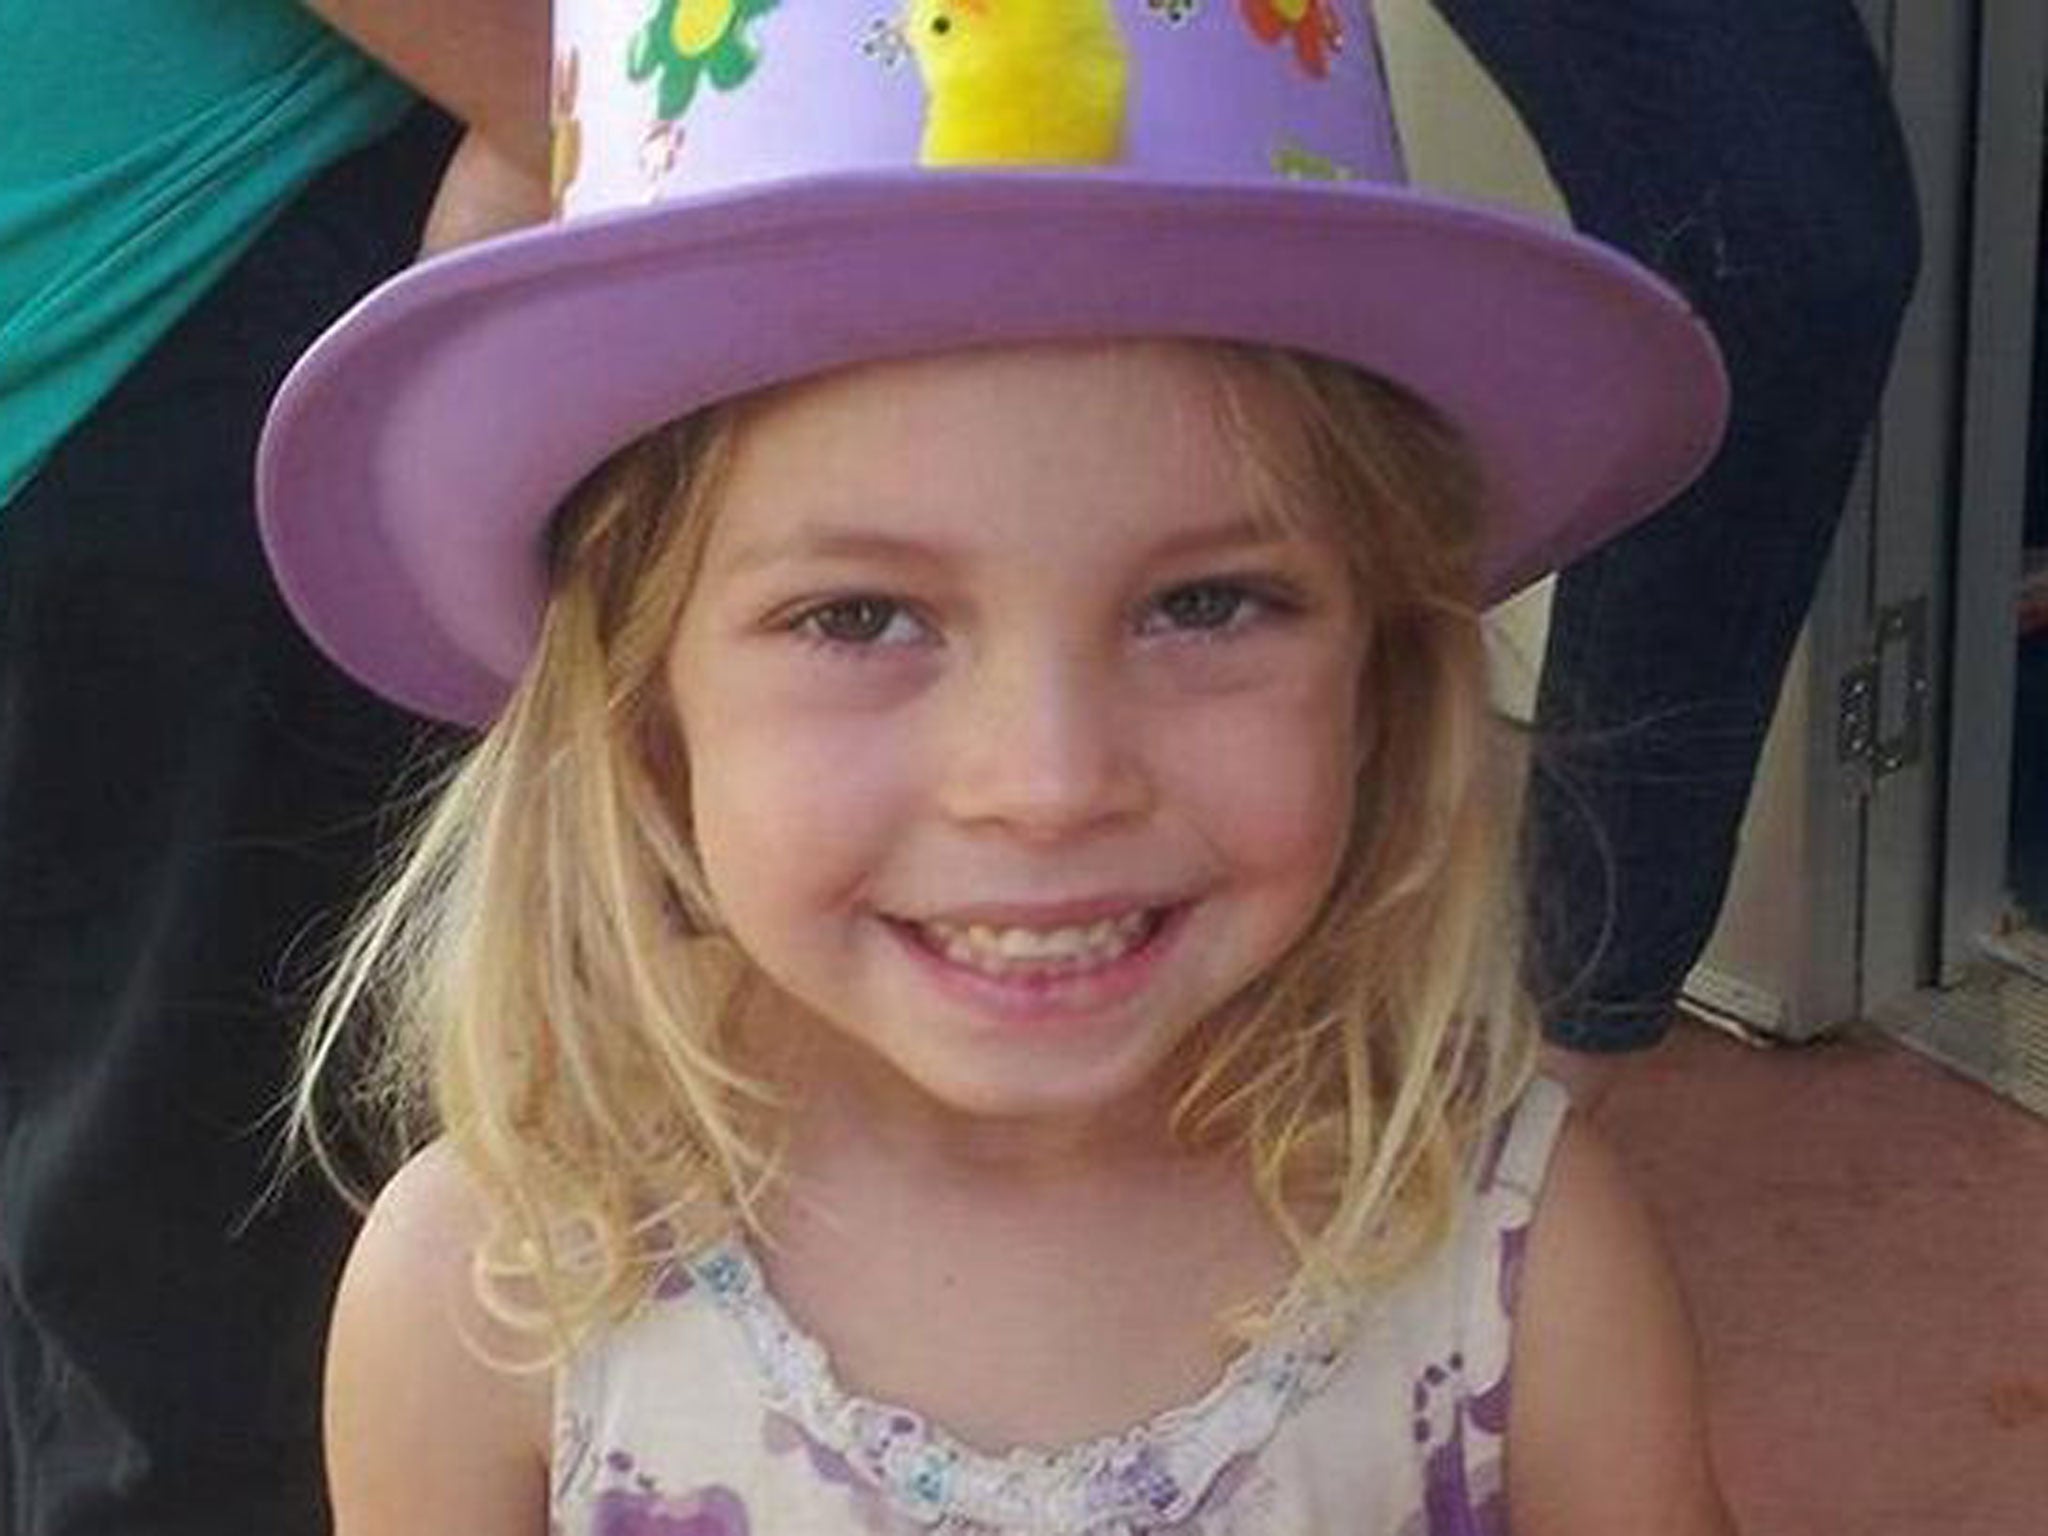 An extensive police and volunteer search through Thursday and Friday has brought no sign of three-year-old Chloe Campbell